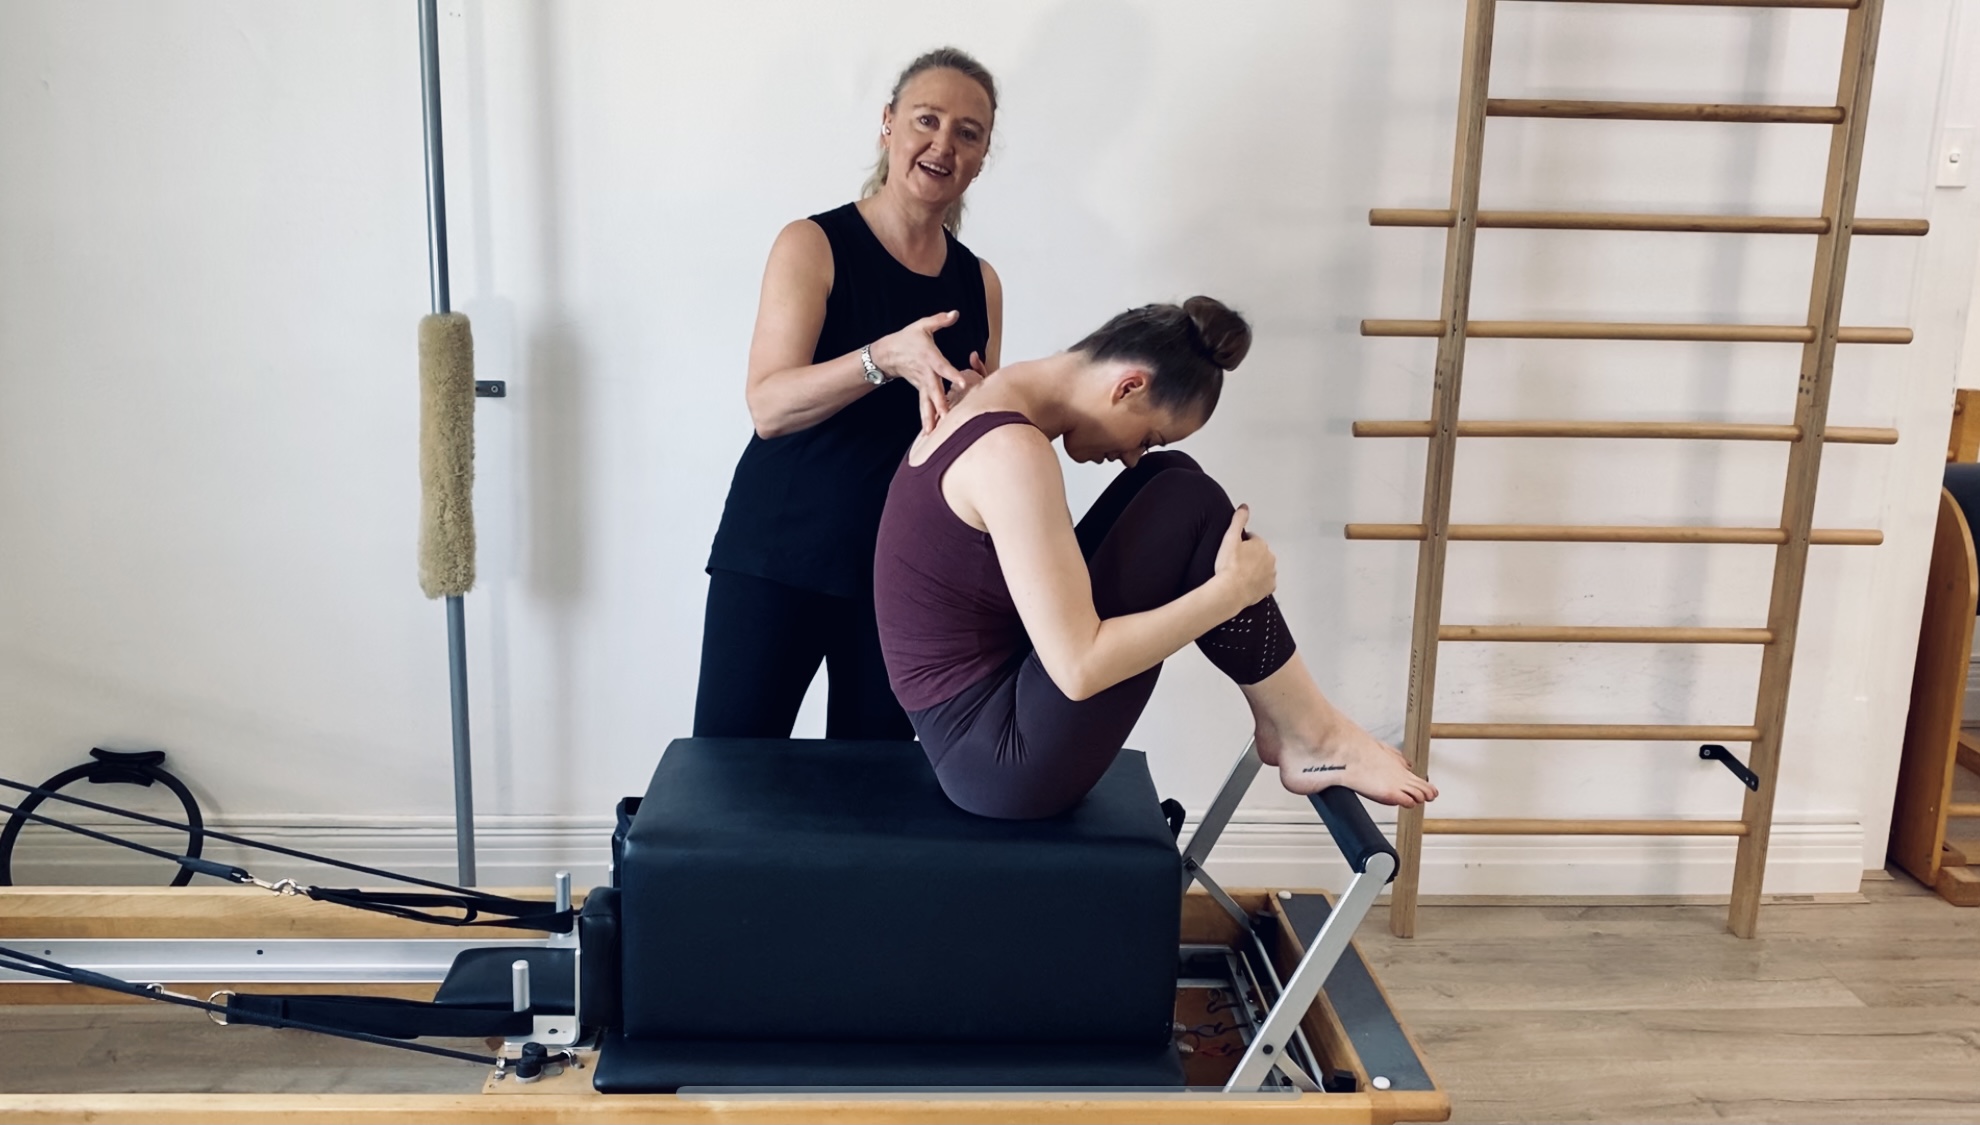 5 Minute Reformer - Long Box Workout 